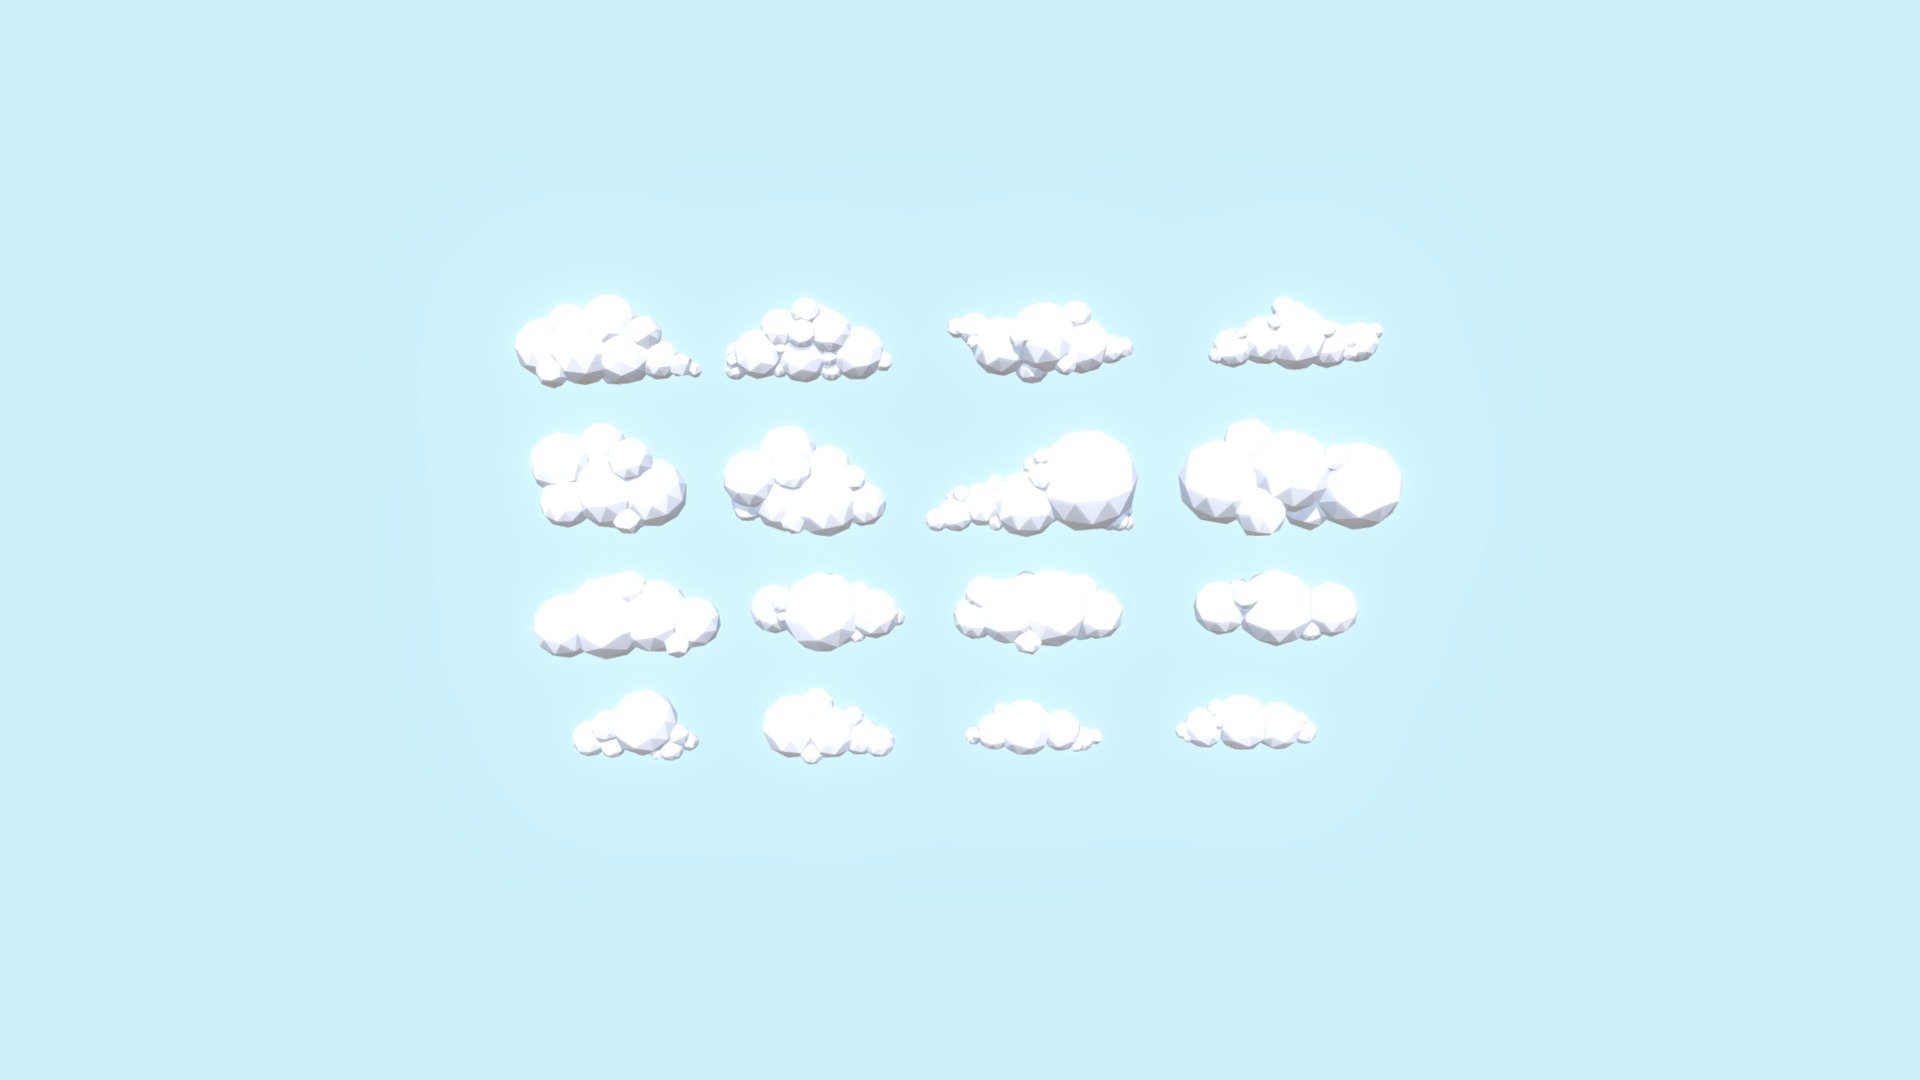 GameReady LowPoly Clouds Pack.

Standart Blender Material.

Mesh objects centered in the scene 0,0,0 for X/Y/Z

Mesh scales and rotation set to 1,1,1 and 0,0,0 respectively.

Created in Blender.

File formats:

-blend

-obj

-fbx

-dae

-3ds


Please rate this product if you liked Do not be shy.
 - LowPoly Clouds - Buy Royalty Free 3D model by DenBru3D (@dilirium) 3d model